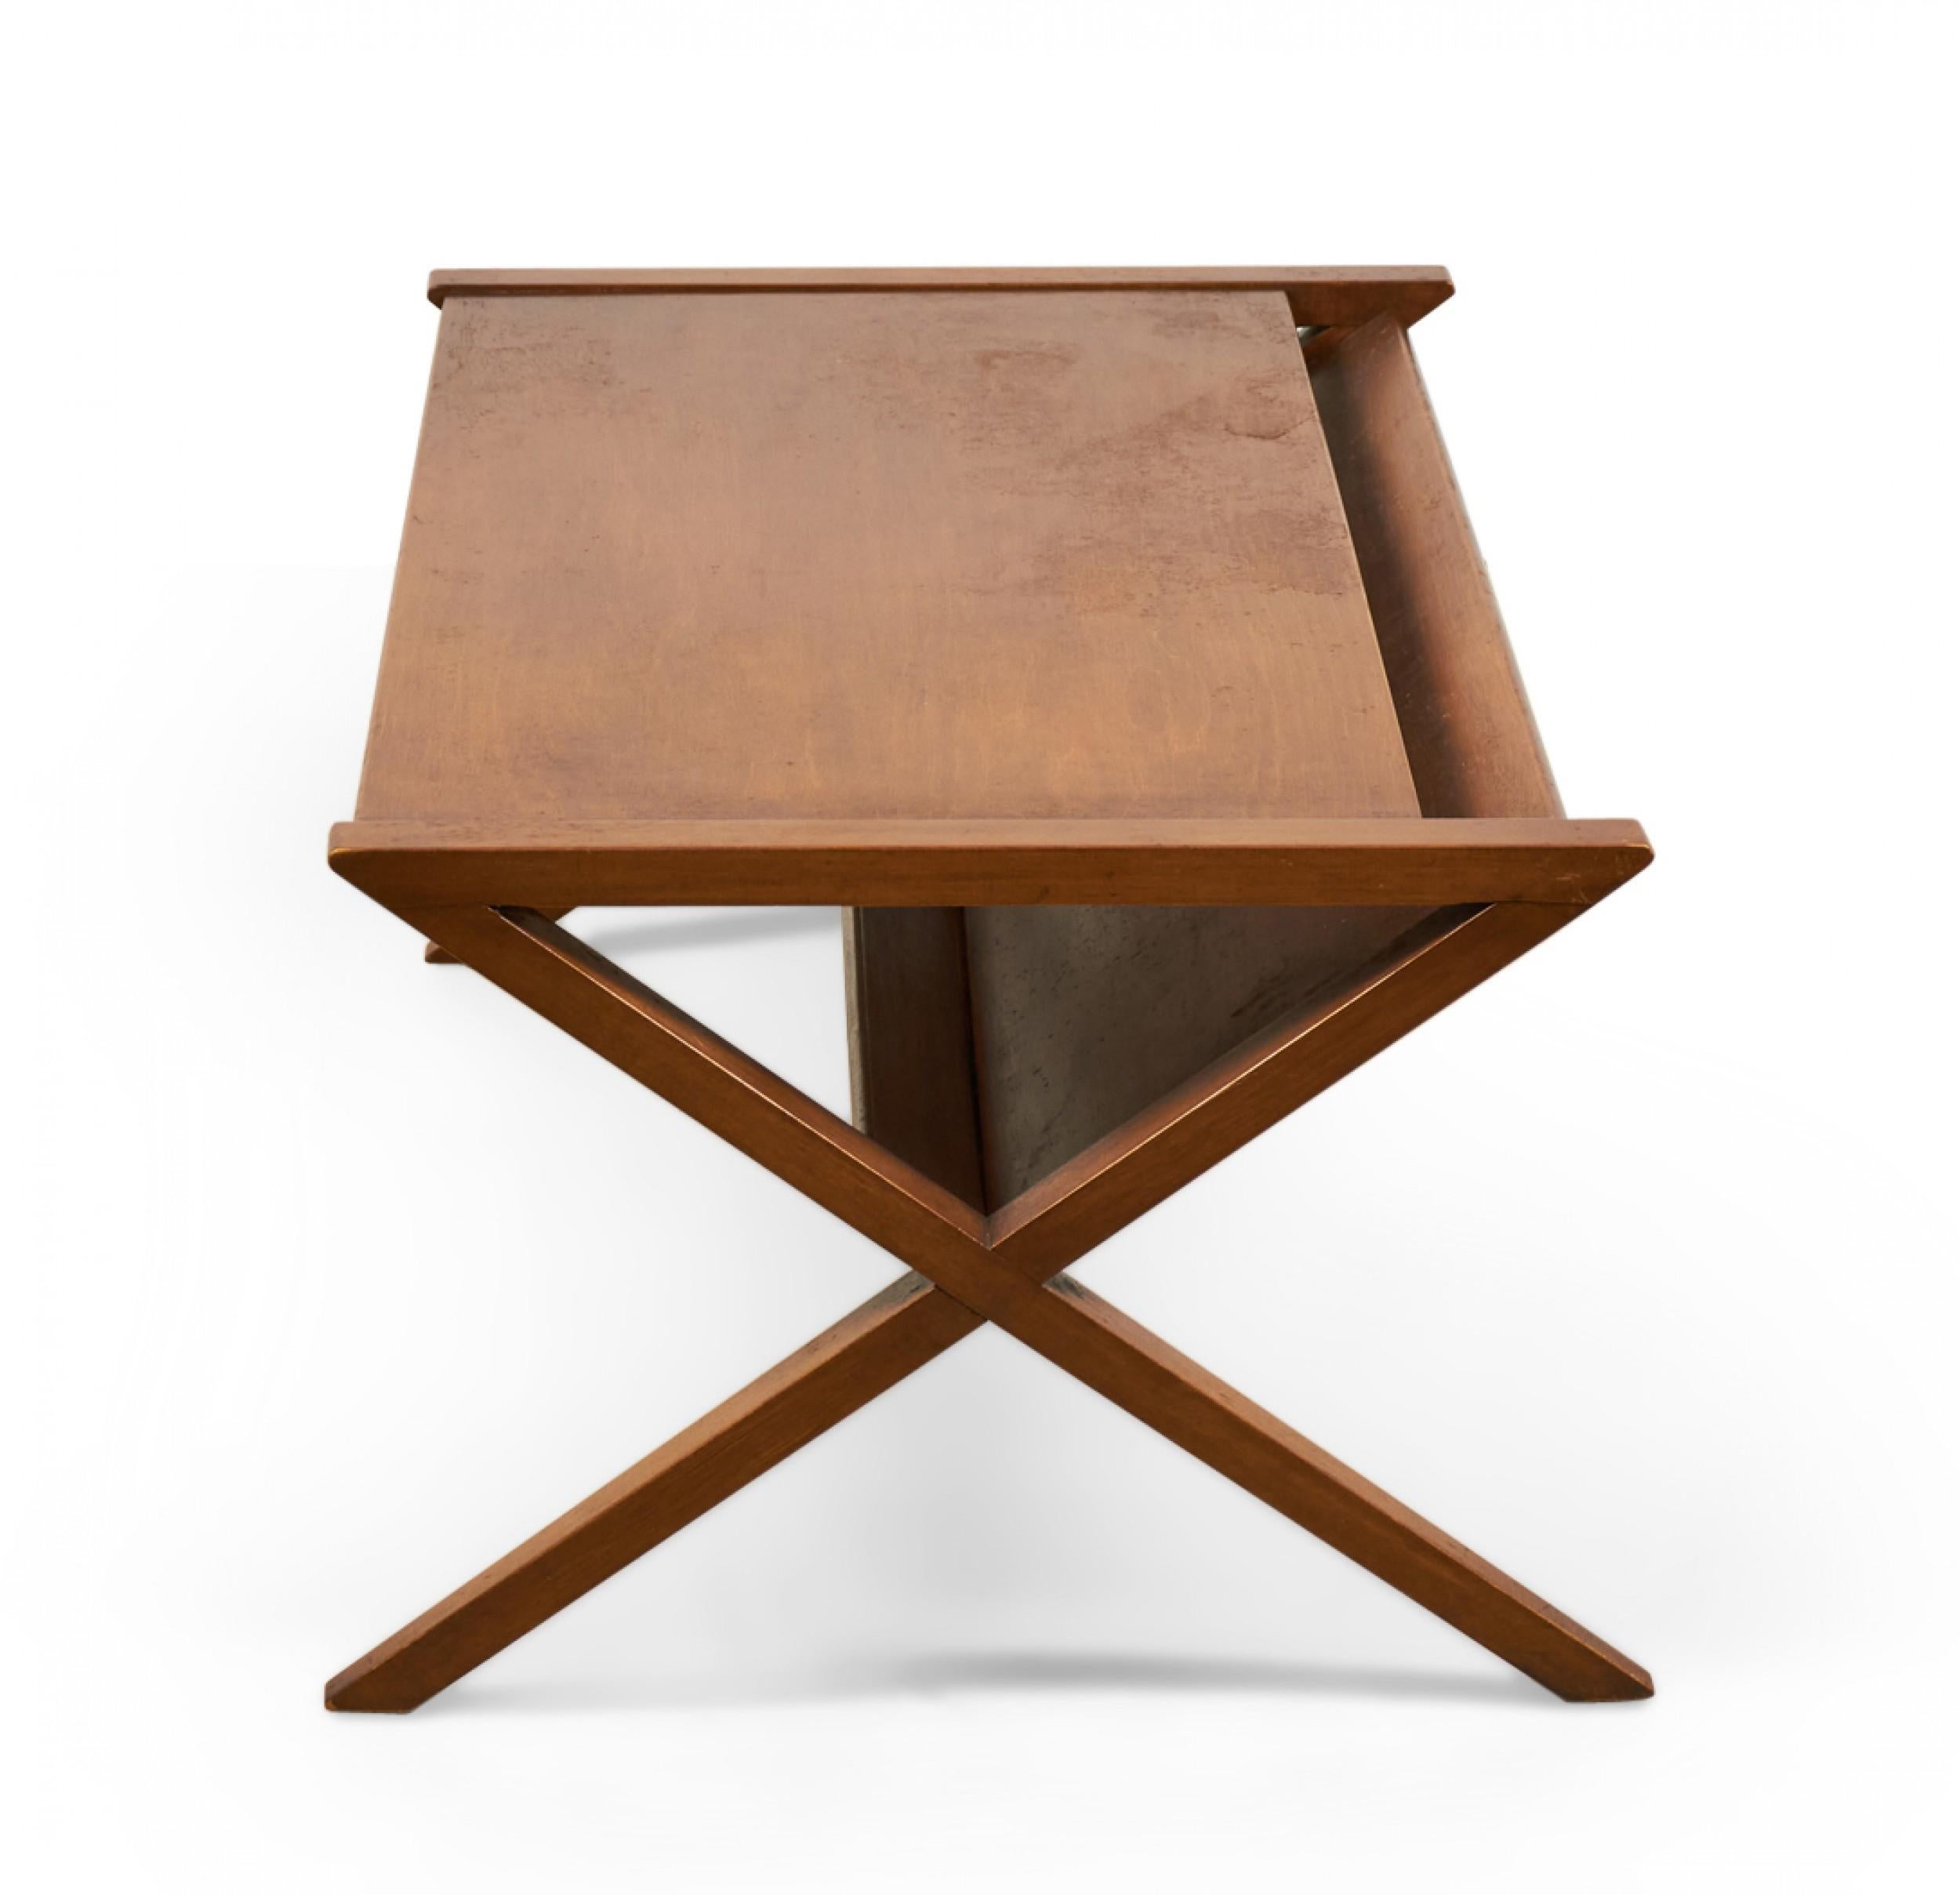 20th Century Founders X-Frame Wooden Coffee / Cocktail Table with Magazine Shelf For Sale